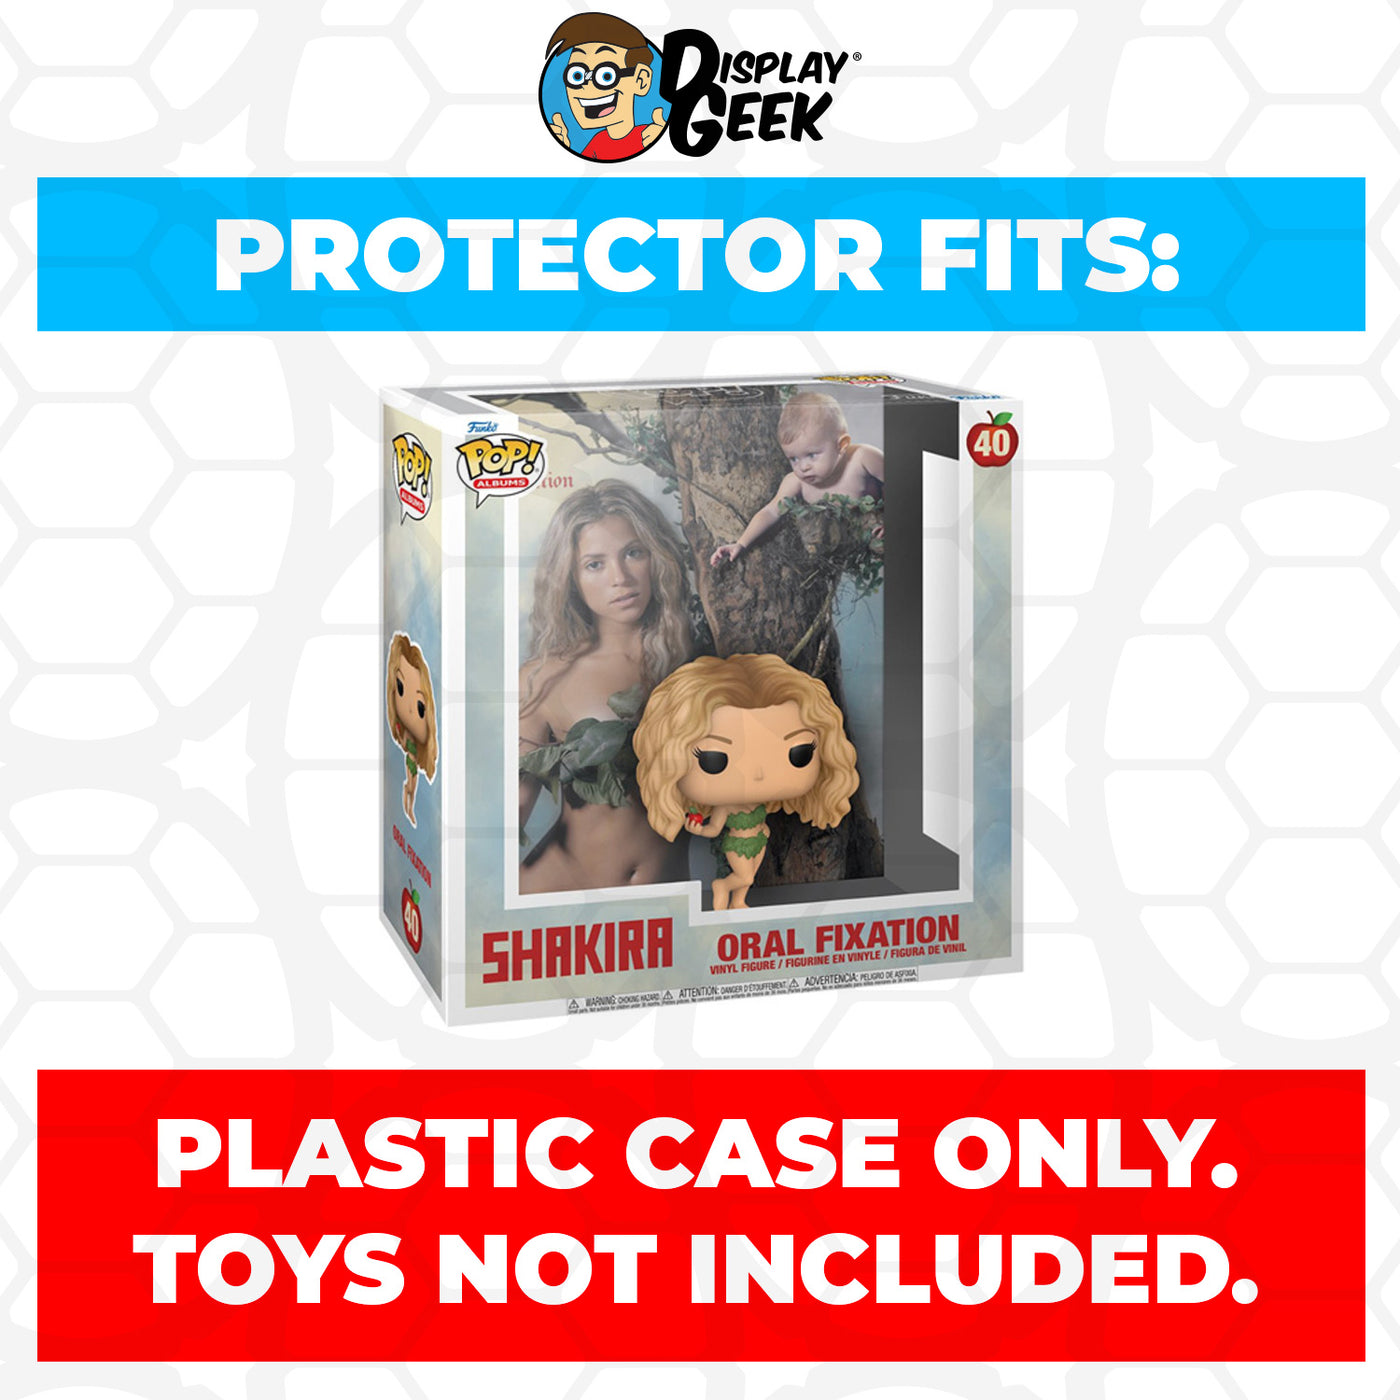 Pop Protector for Shakira Oral Fixation #40 Funko Pop Albums on The Protector Guide App by Display Geek